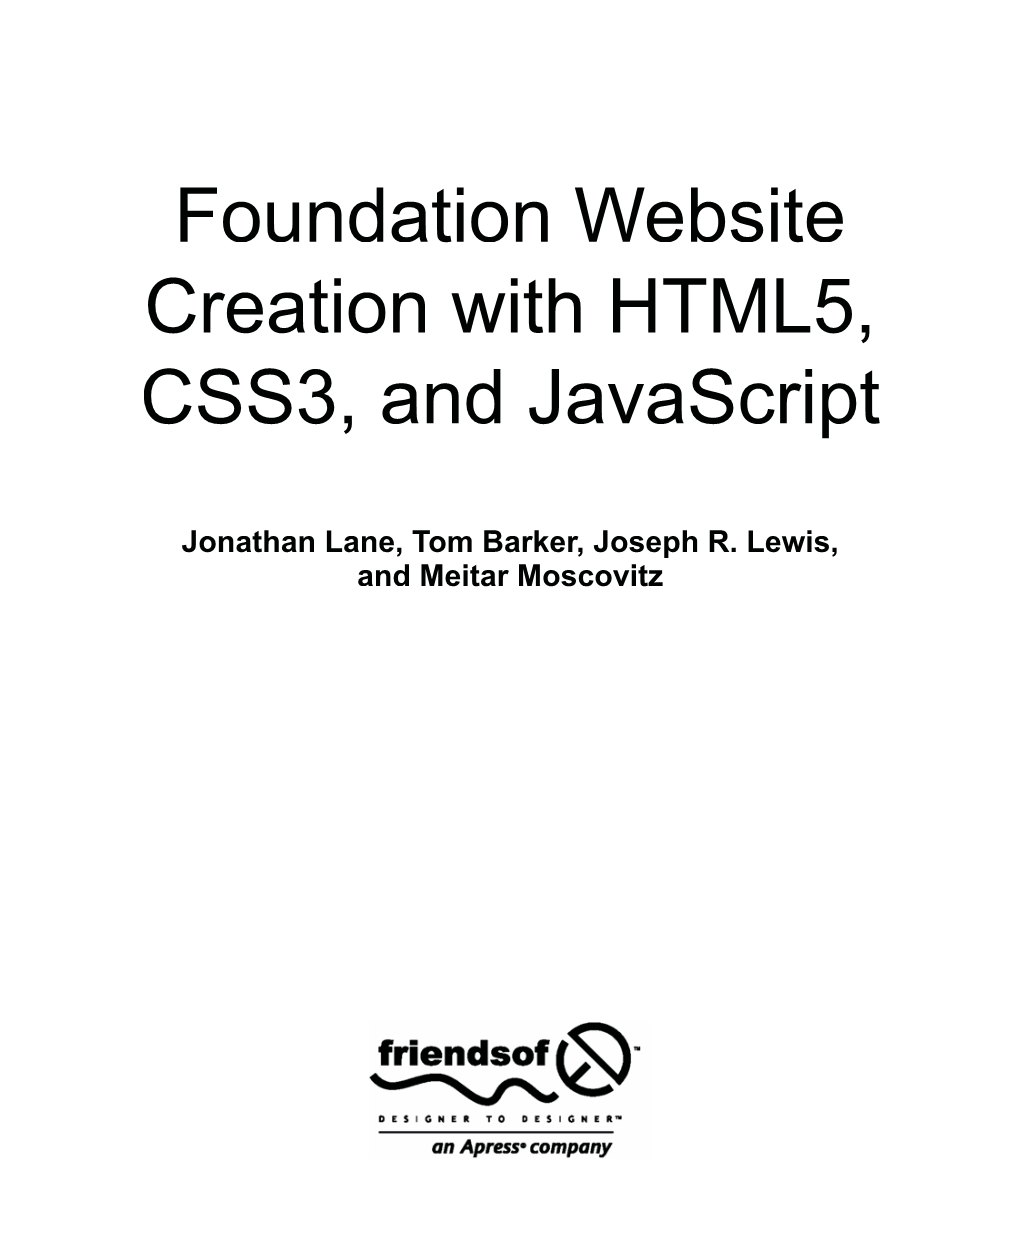 Foundation Website Creation with HTML5, CSS3, and Javascript